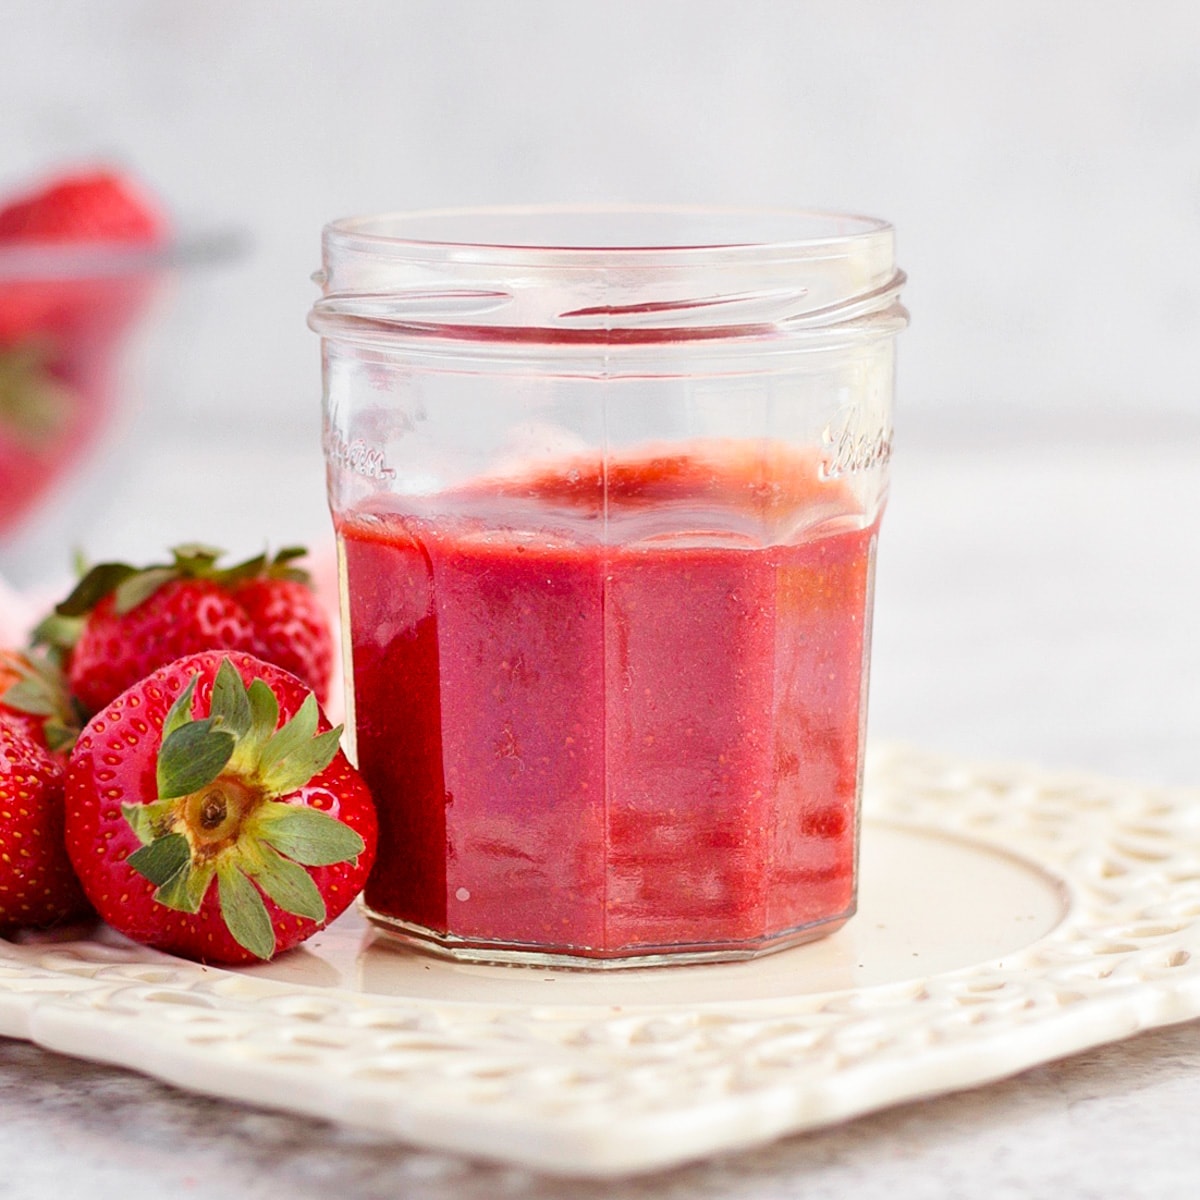 Strawberry Coulis in a Glass Jar surrounded by fresh strawberries.